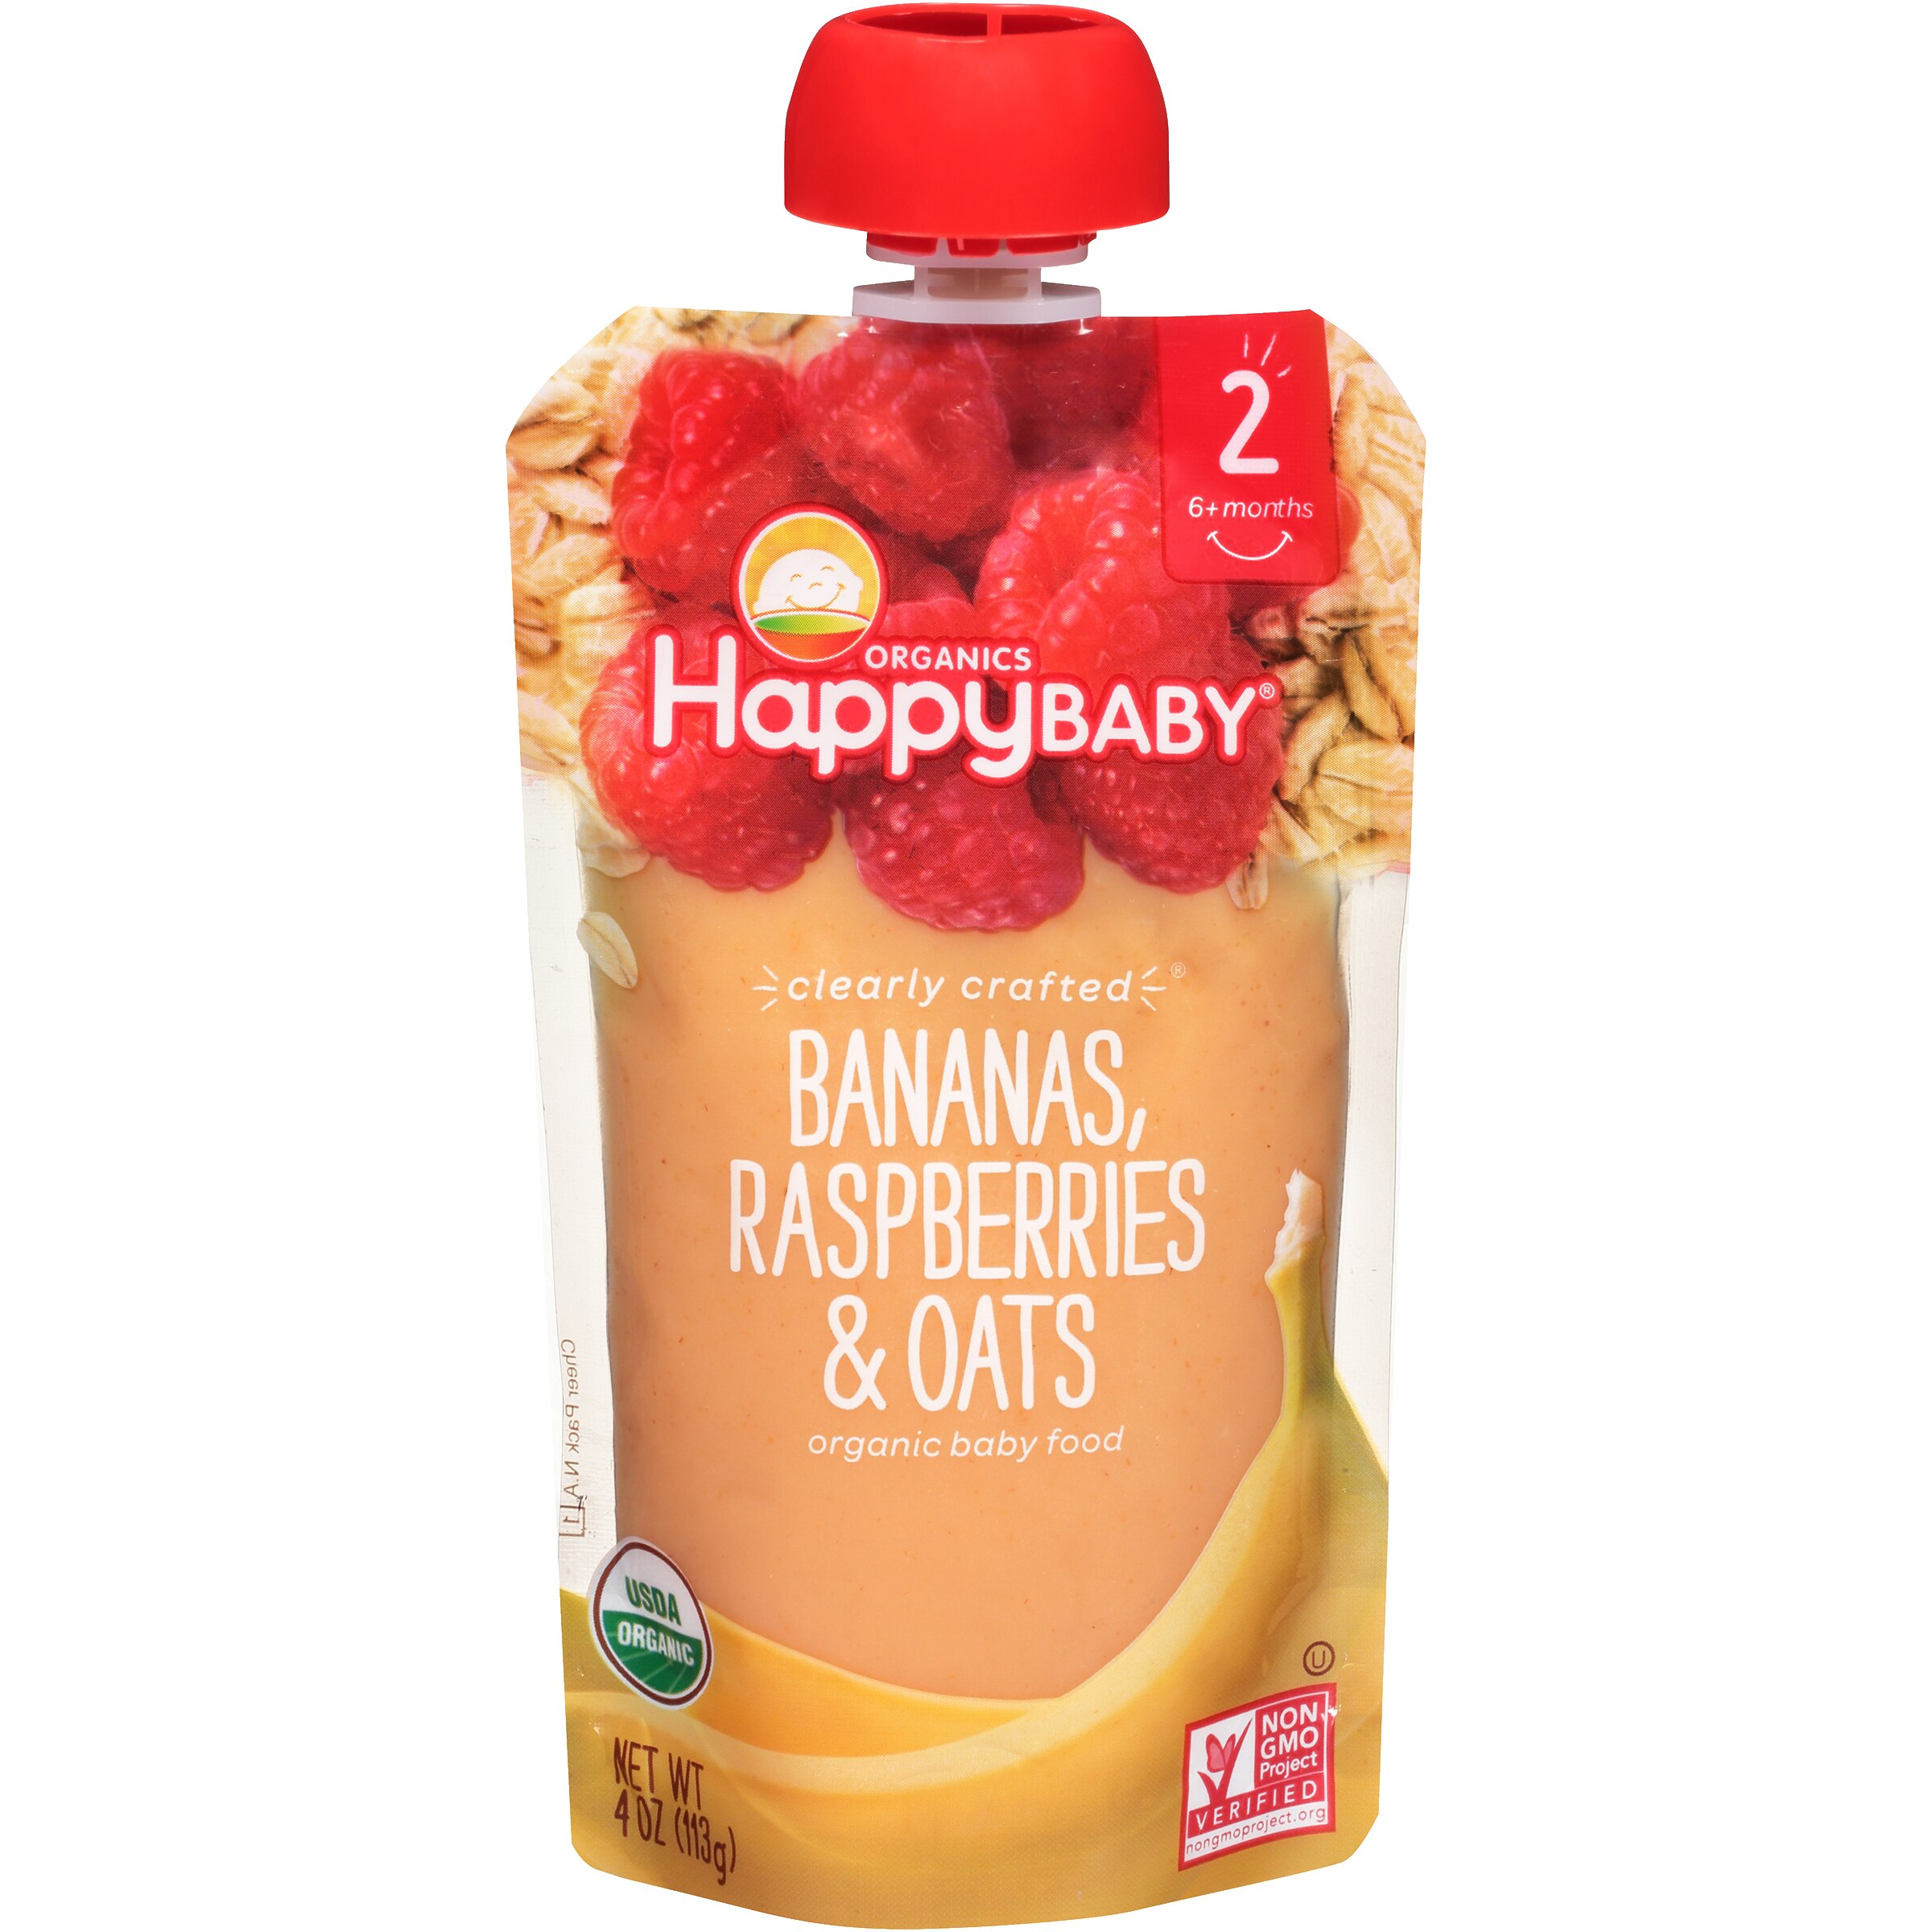 HappyBaby Clearly Crafted Bananas Raspberries & Oats Baby Food Pouch